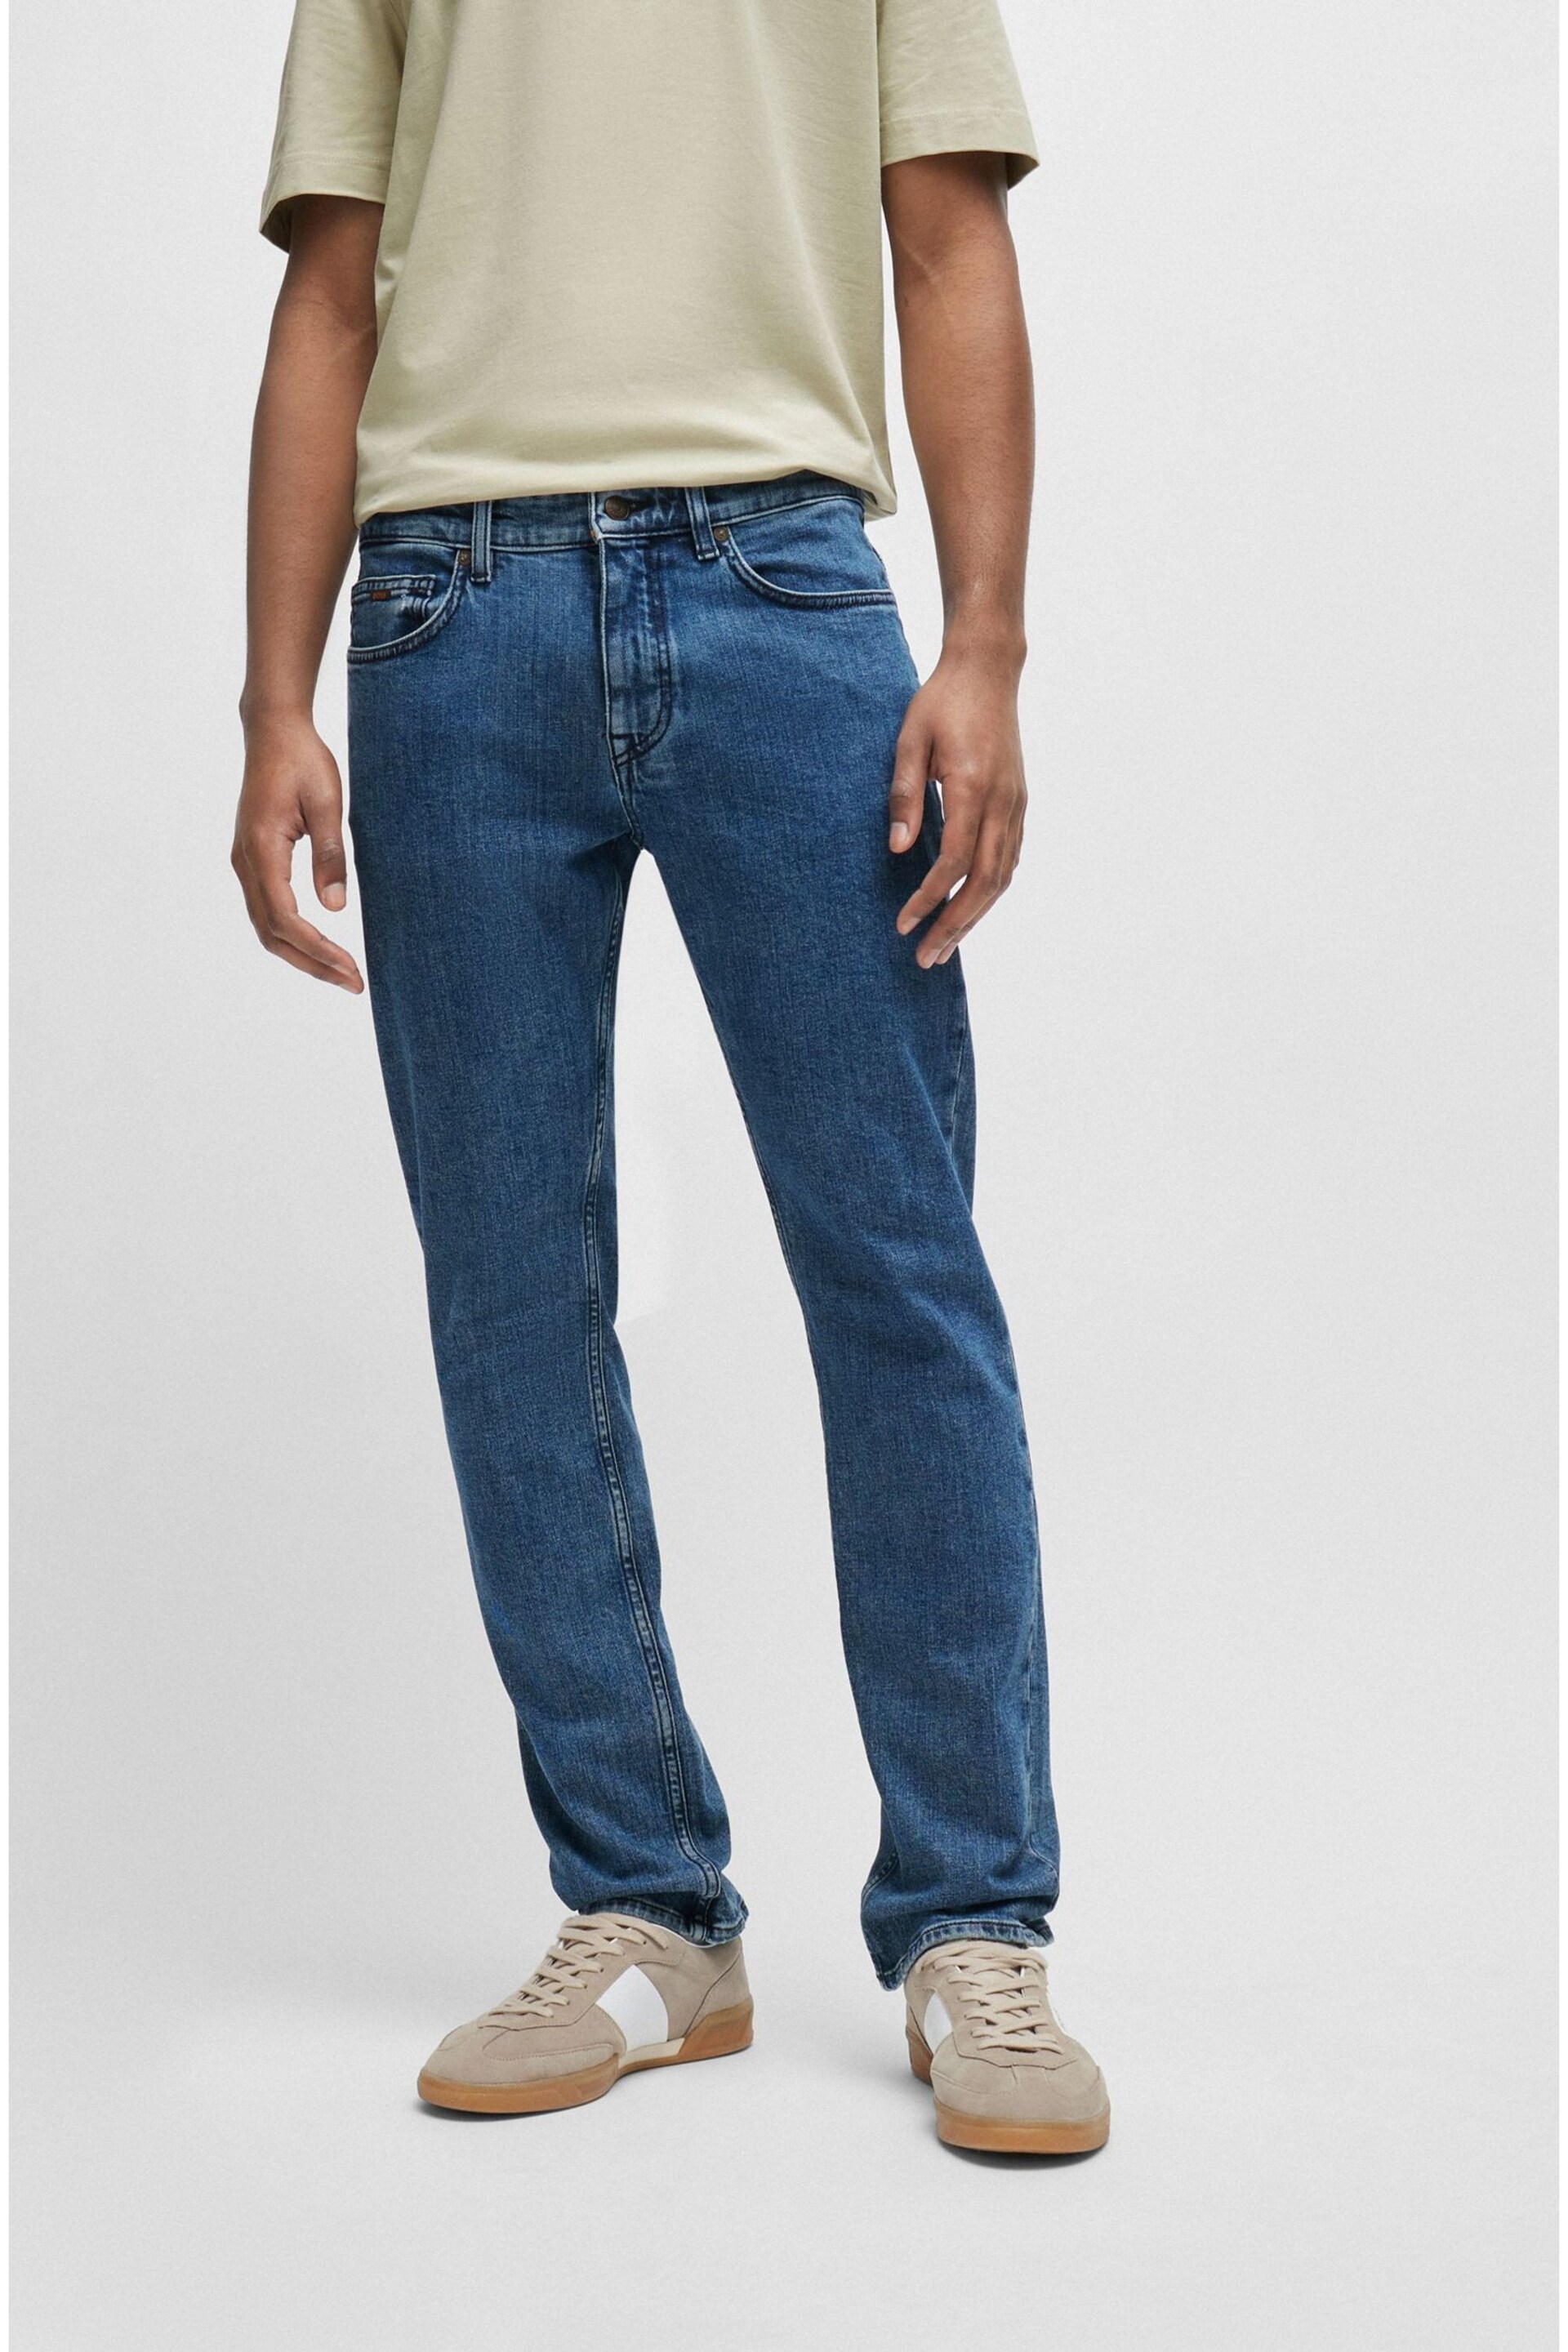 BOSS Mid Blue Maine Straight Fit Stretch Jeans - Image 1 of 5